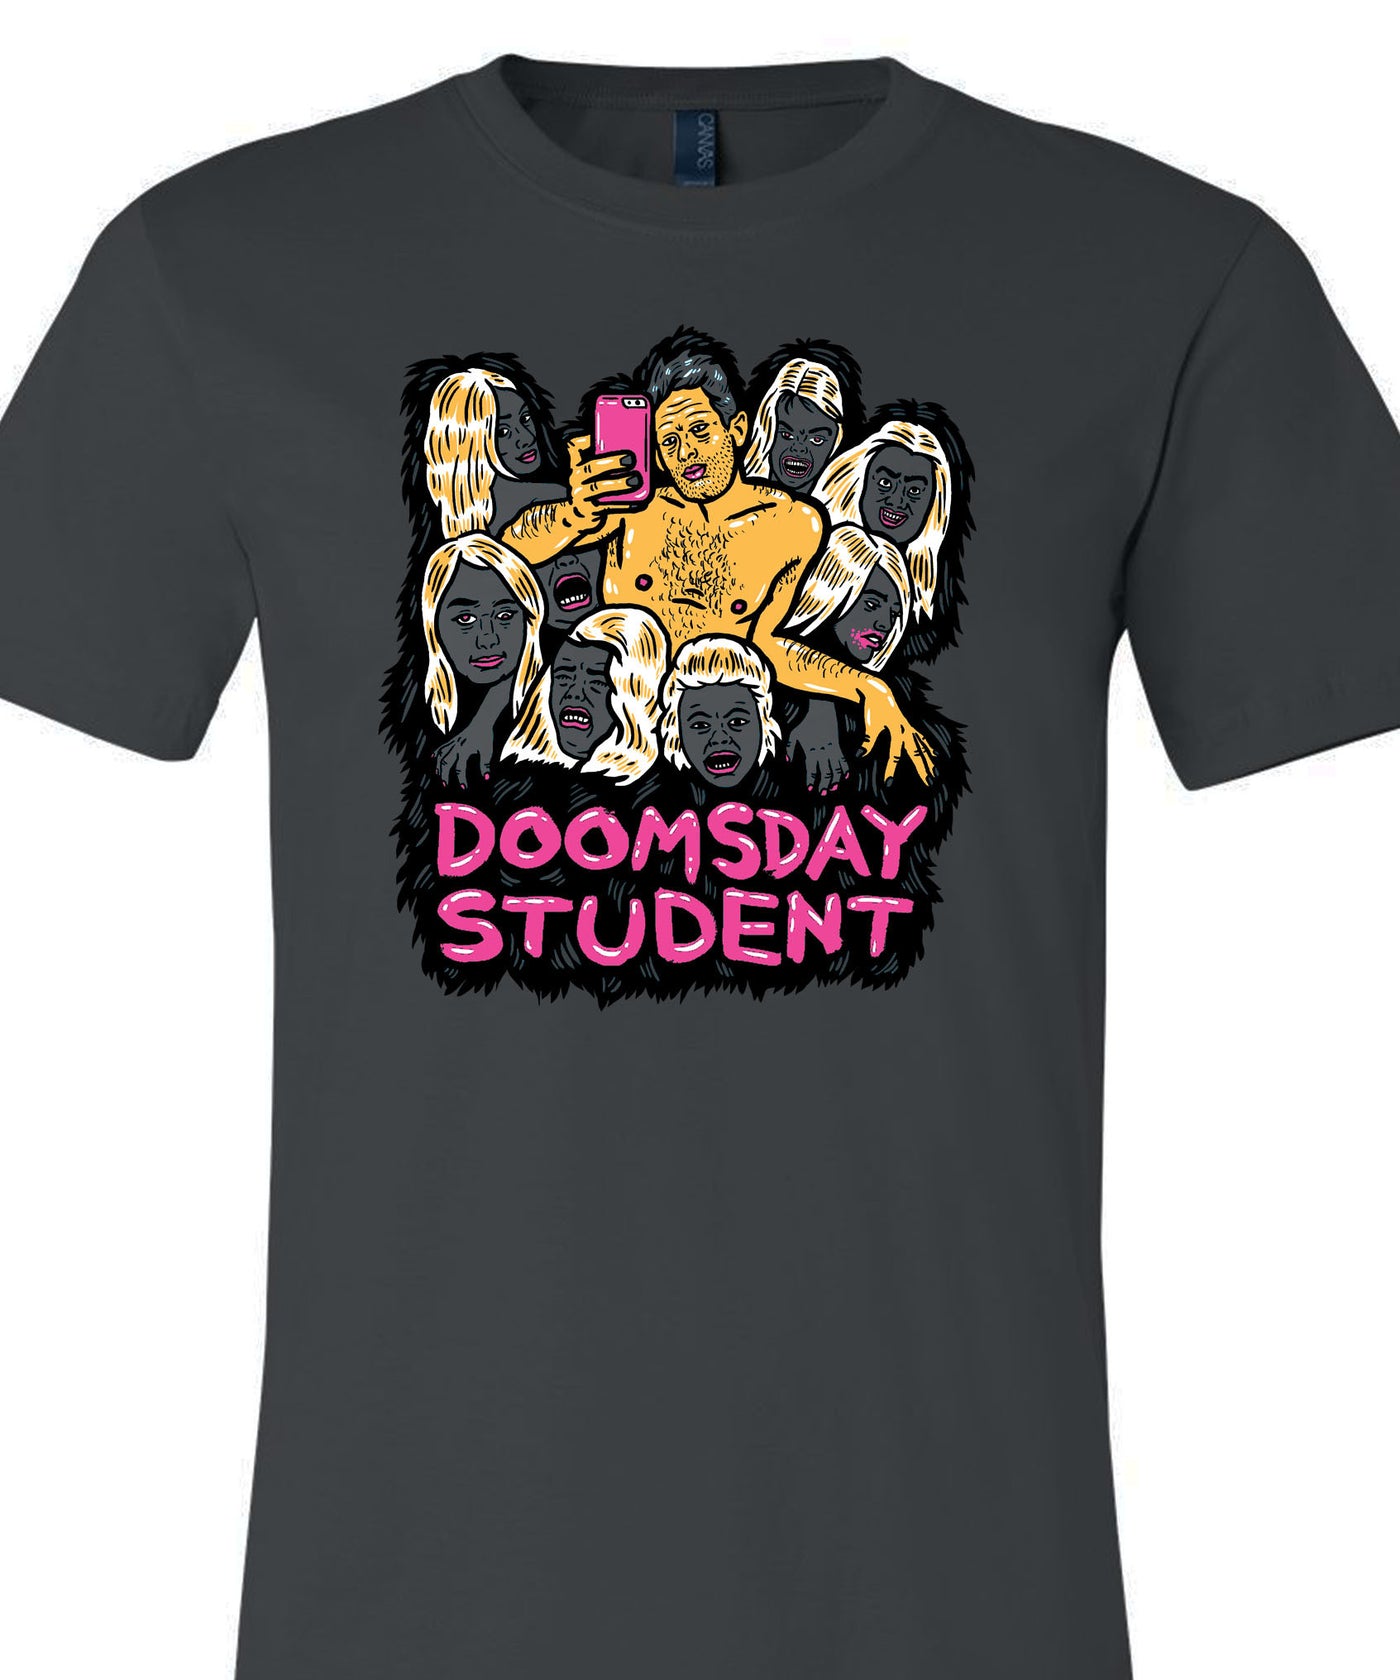 Doomsday Student T's with Skin Graft Records back logo artwork by Luke Boggia